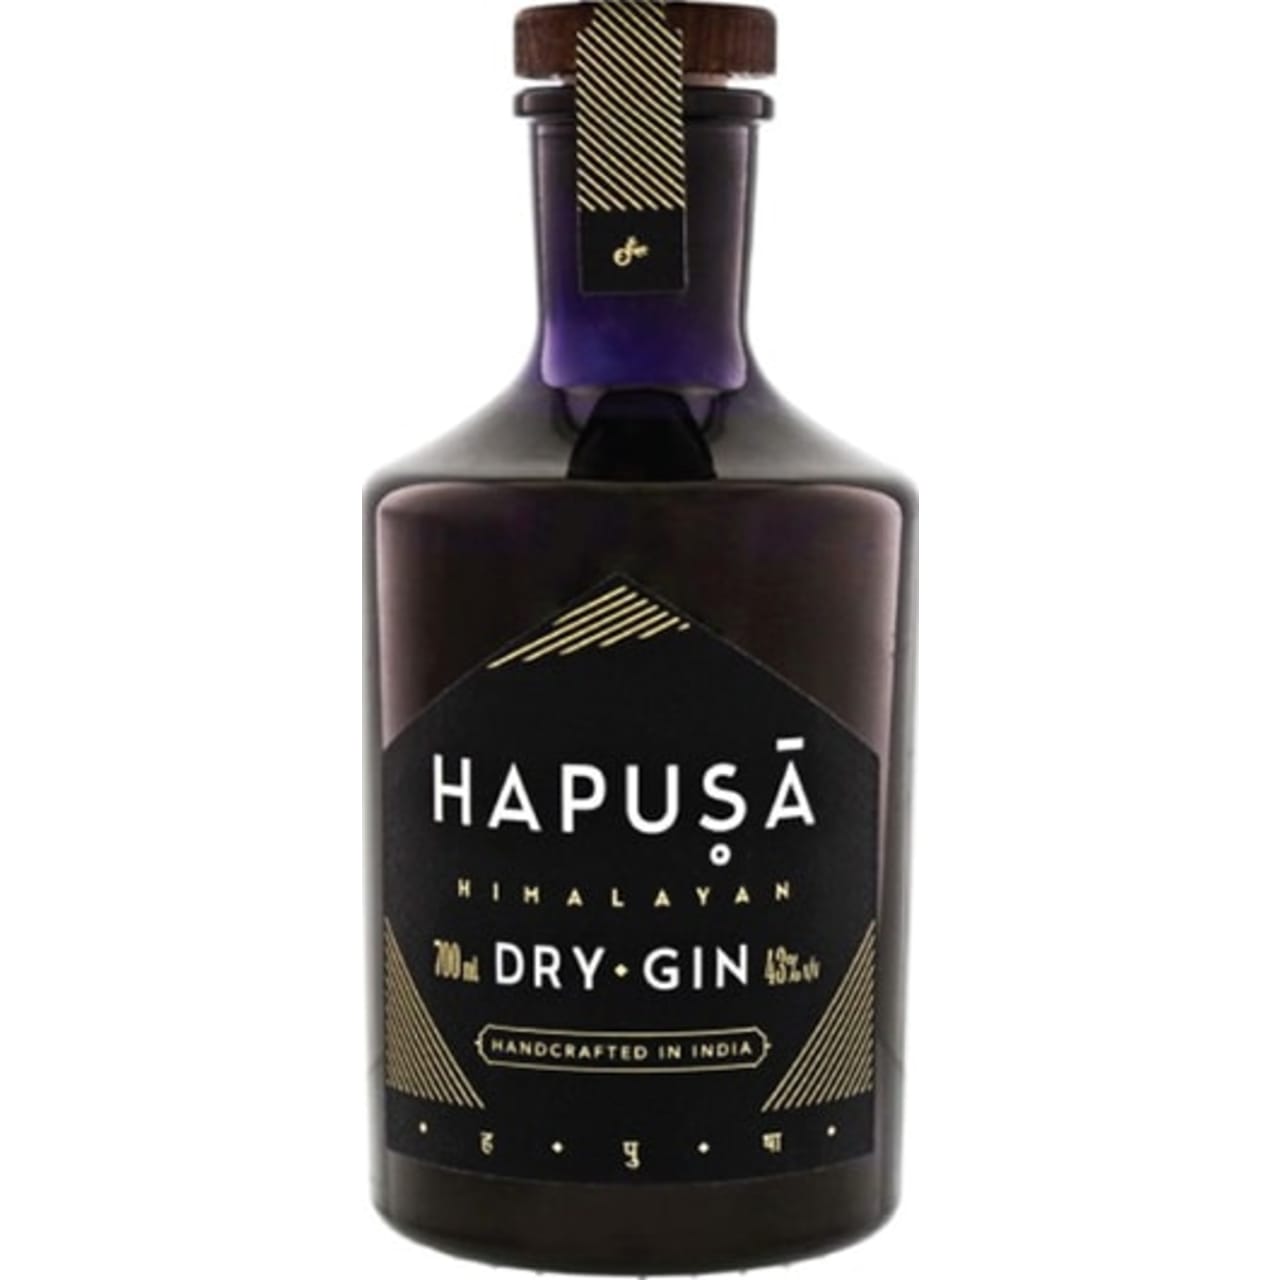 An incredible smooth Gin produced from Juniper and botanicals sourced from the pine forests located at the foot of the Himalayans. The concentration of citrus, flora and spice makes it ideal to pairs with a variety of flavoursome cuisines.